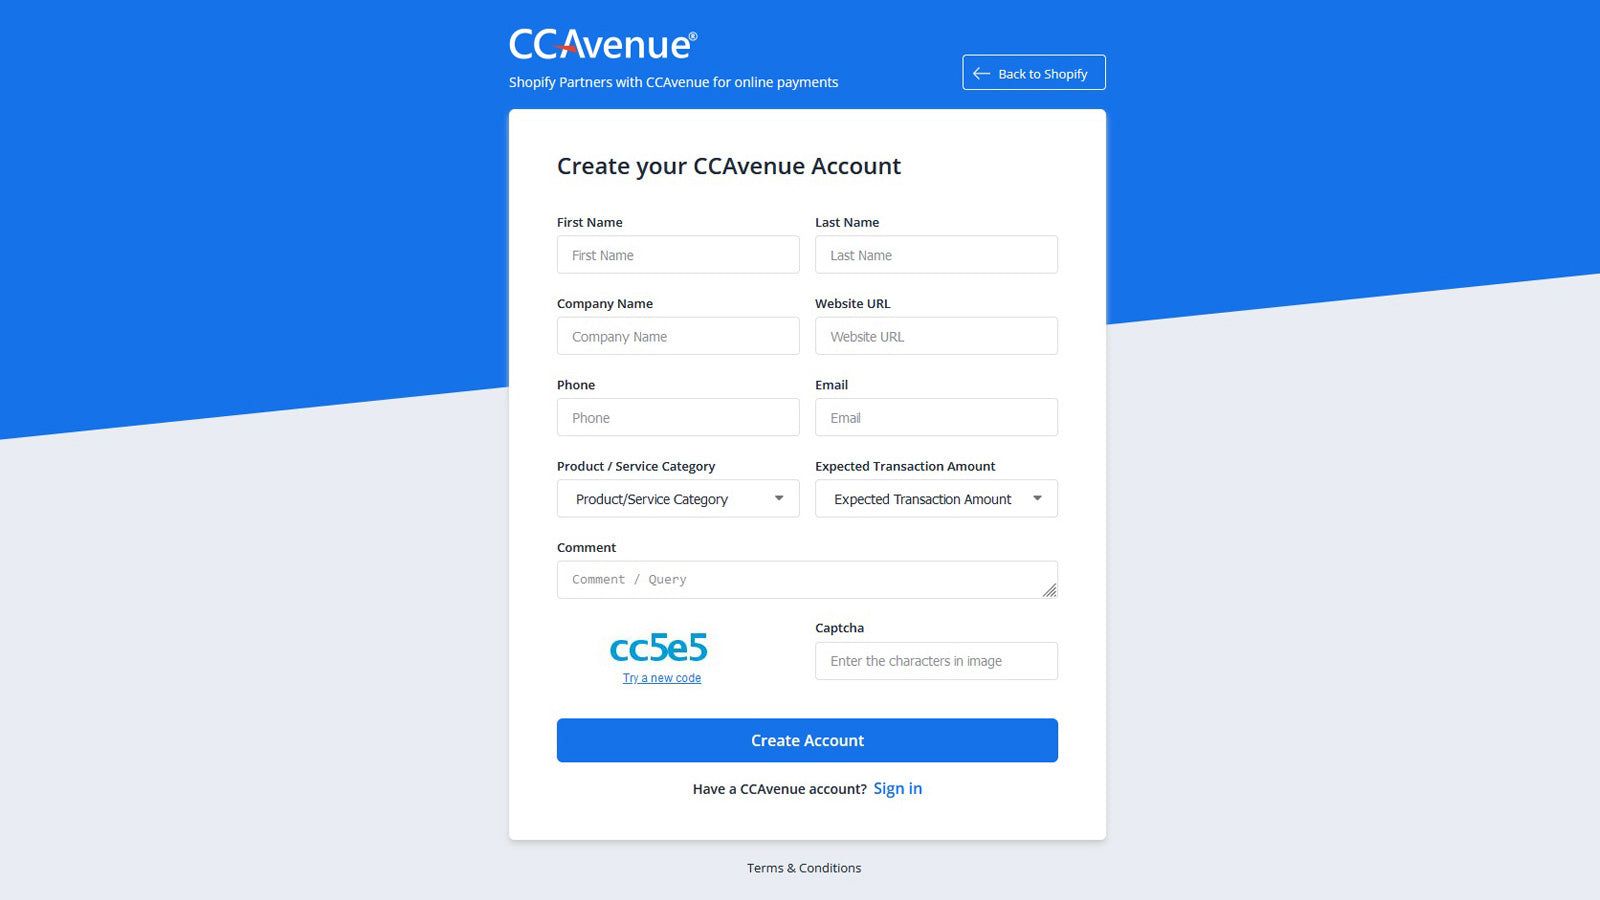 If you are not signed up with CCAvenue, you can use the sign up.